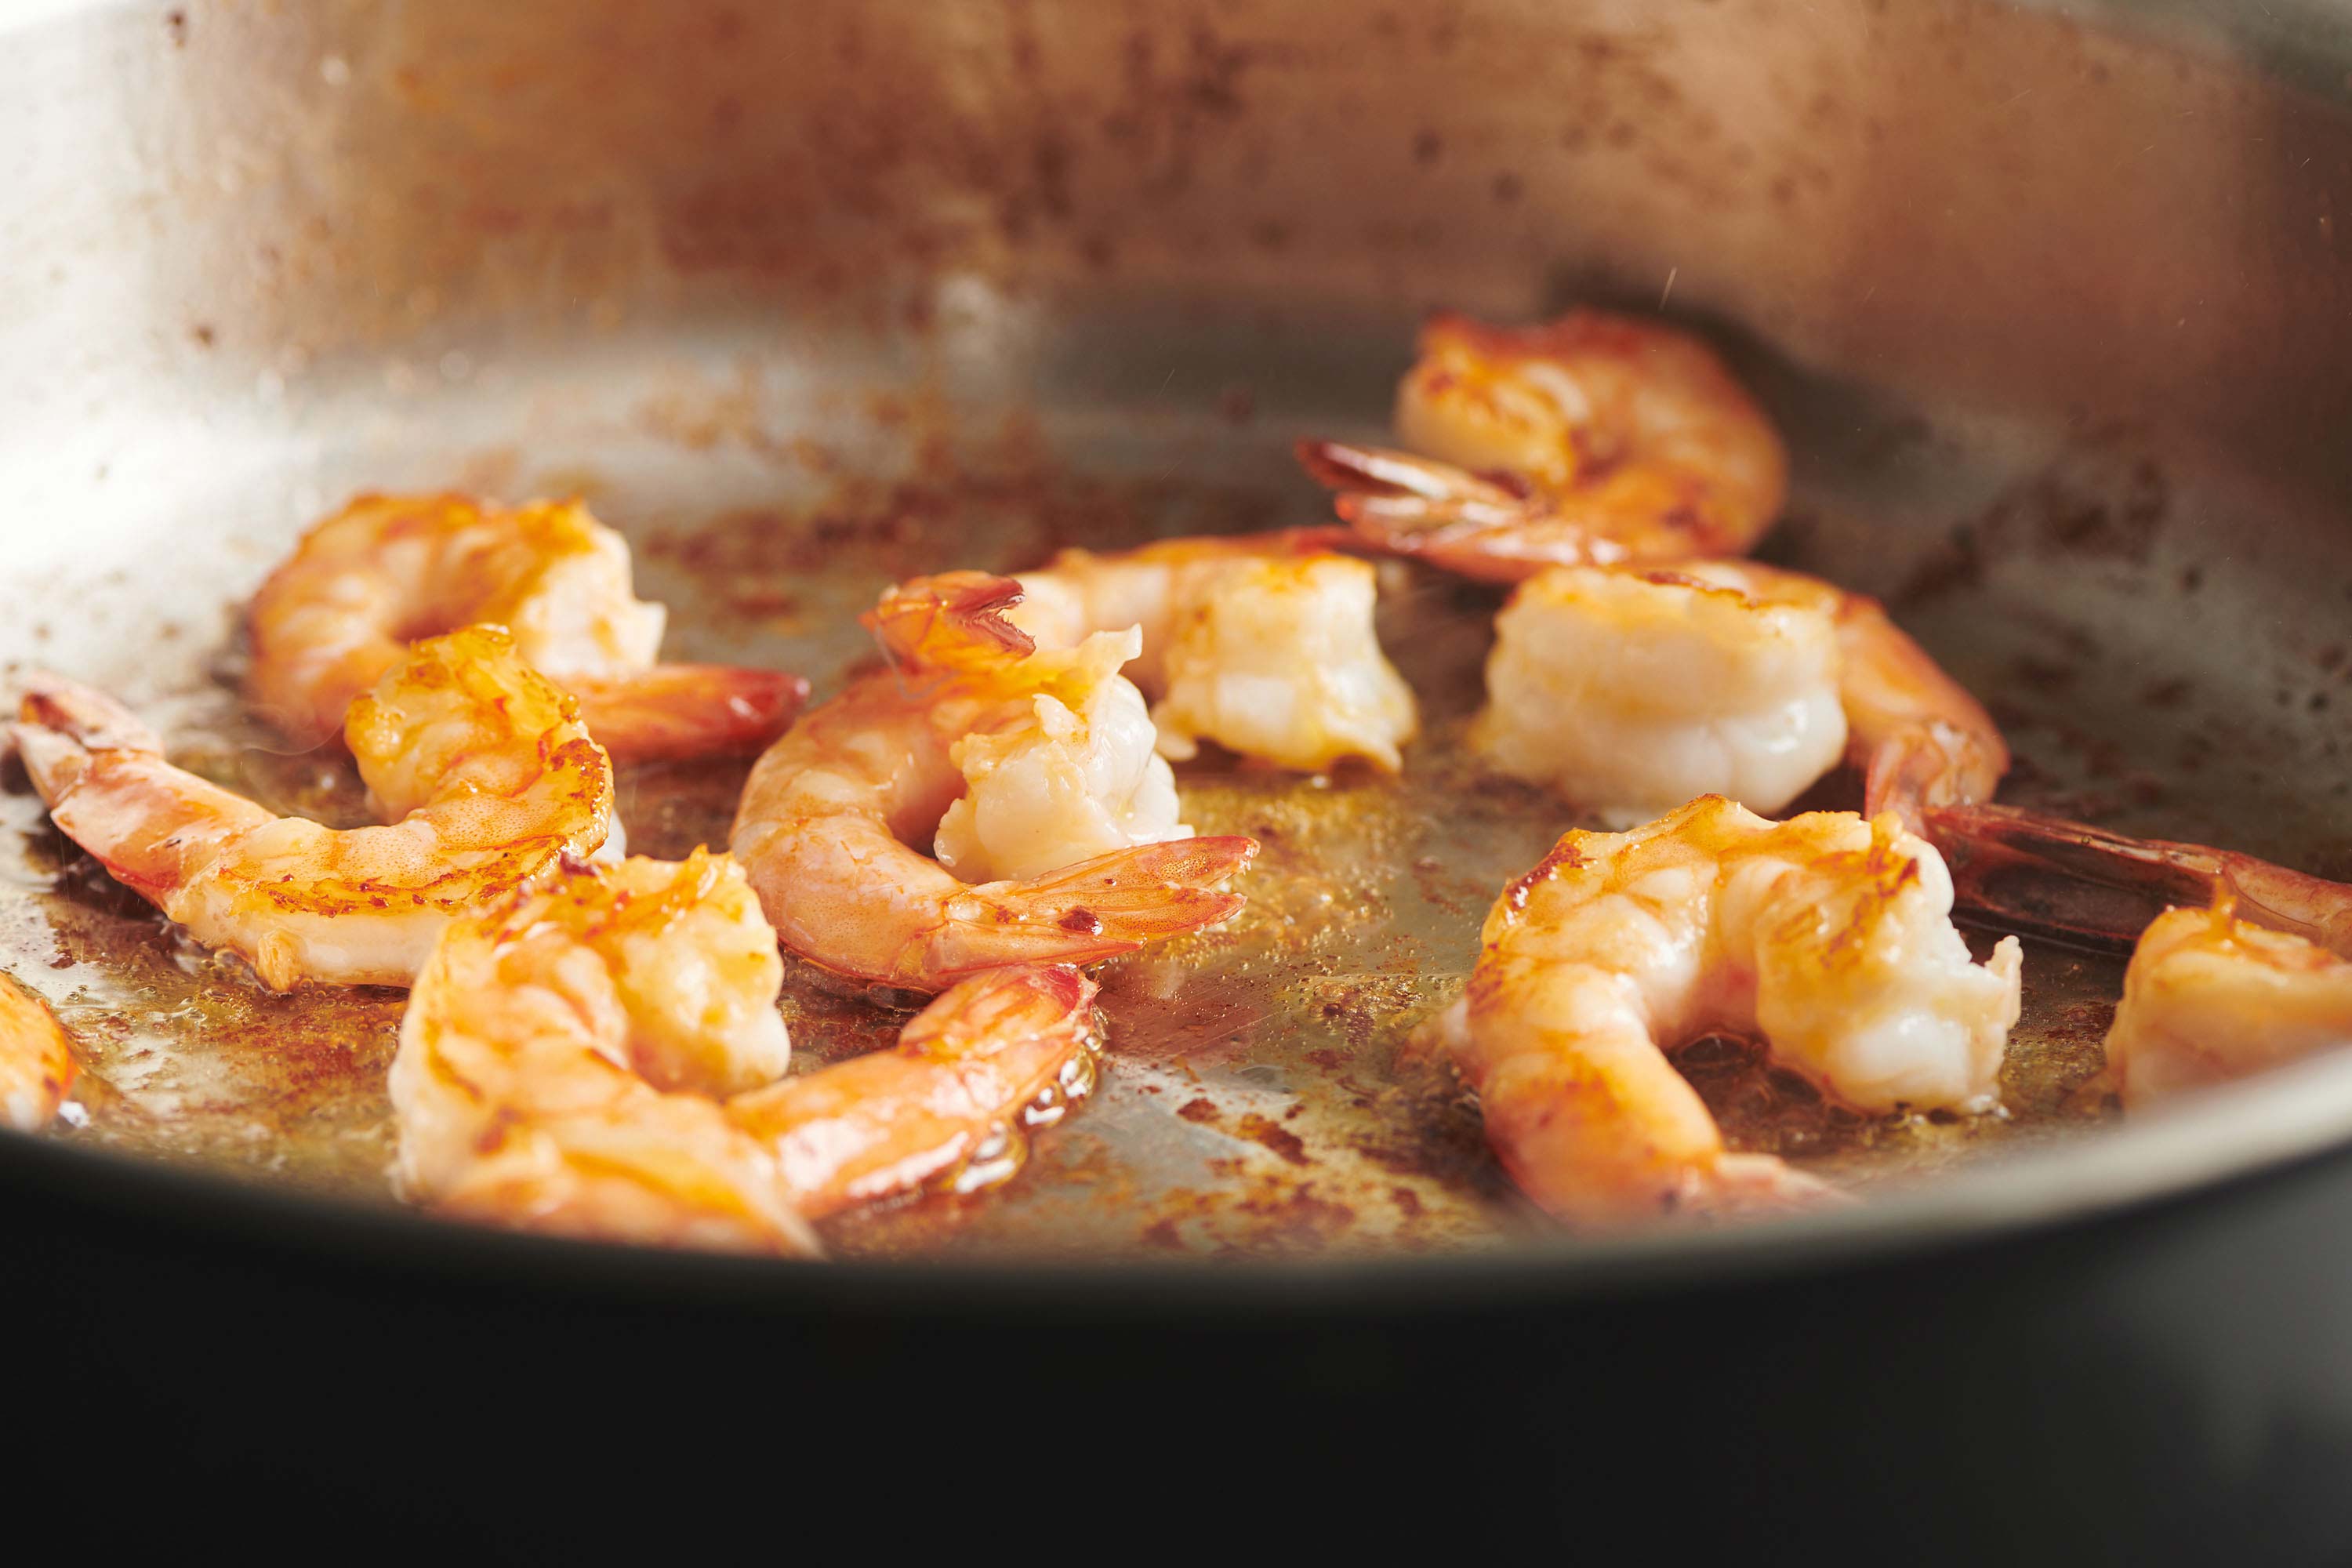 Shrimp sauteing in pan on the stove.